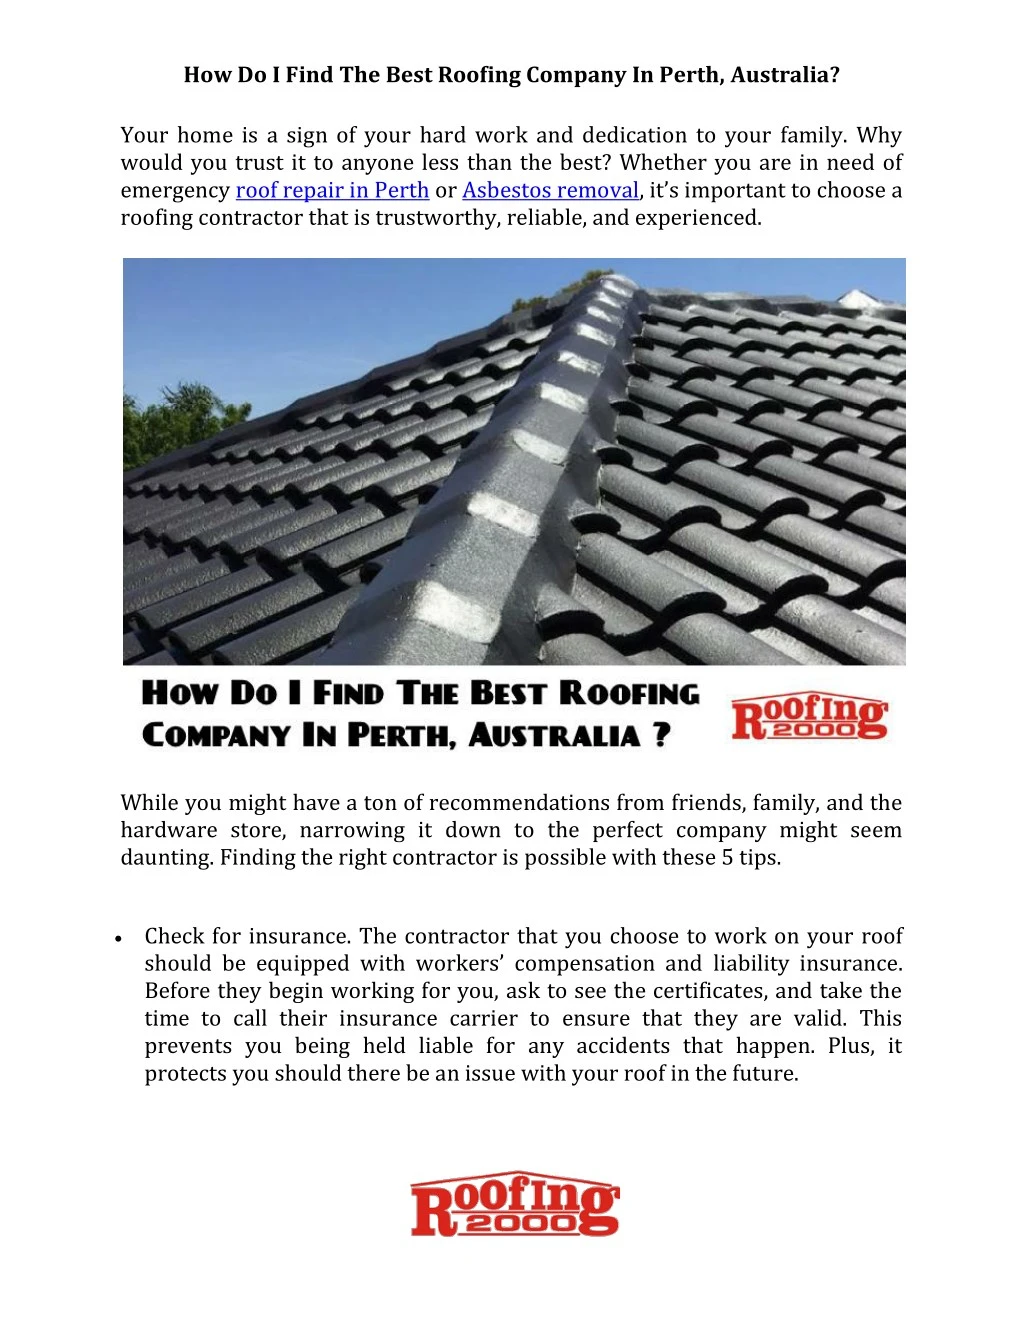 how do i find the best roofing company in perth